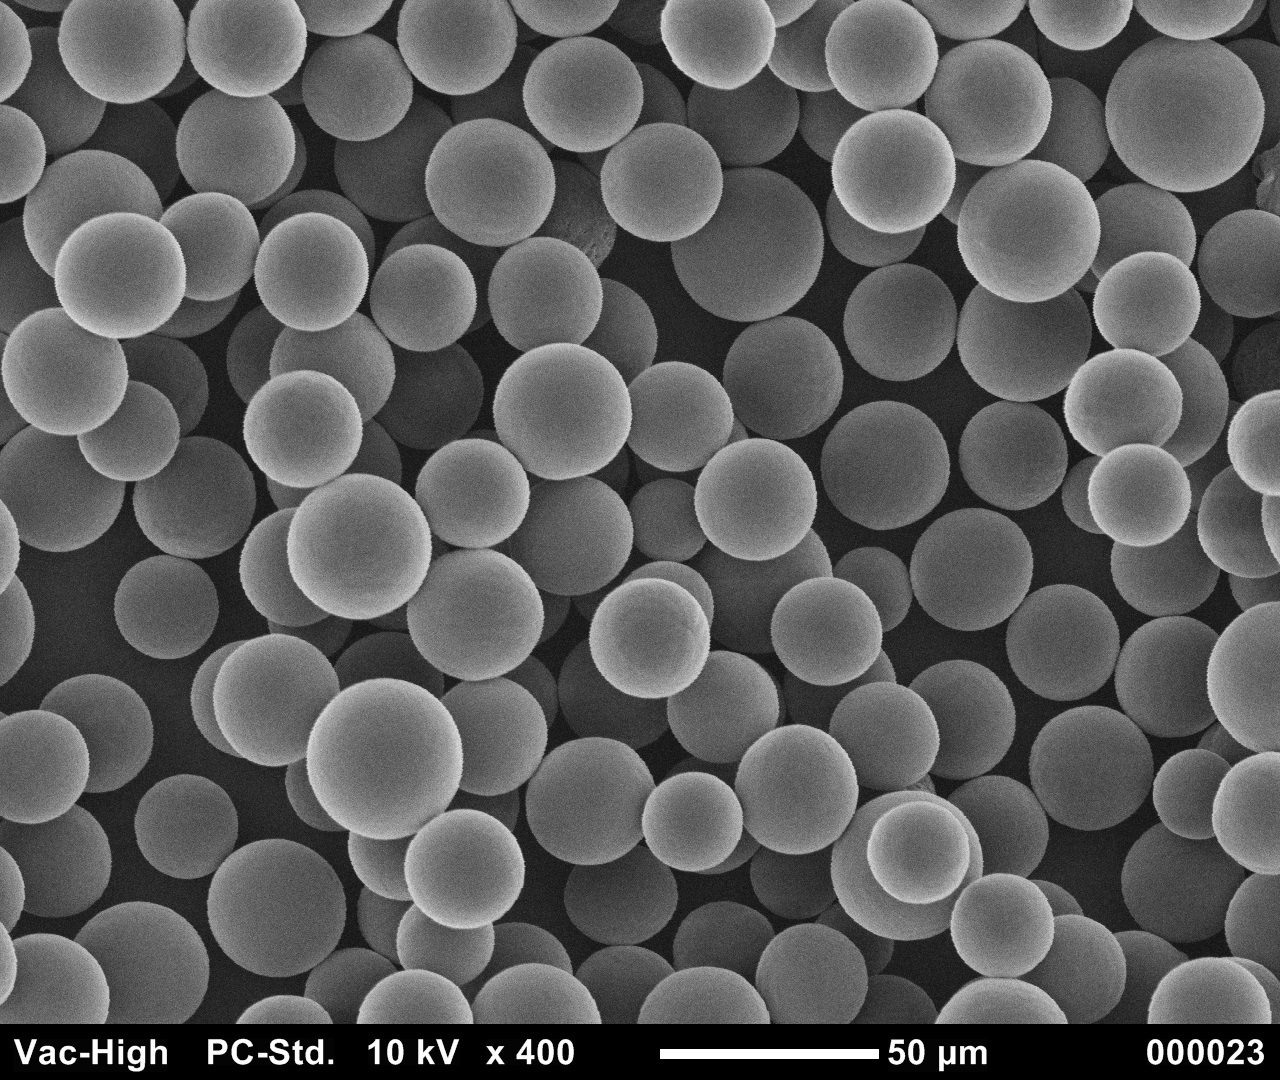 Synbiosys microparticles for sustained release delivery of biologics